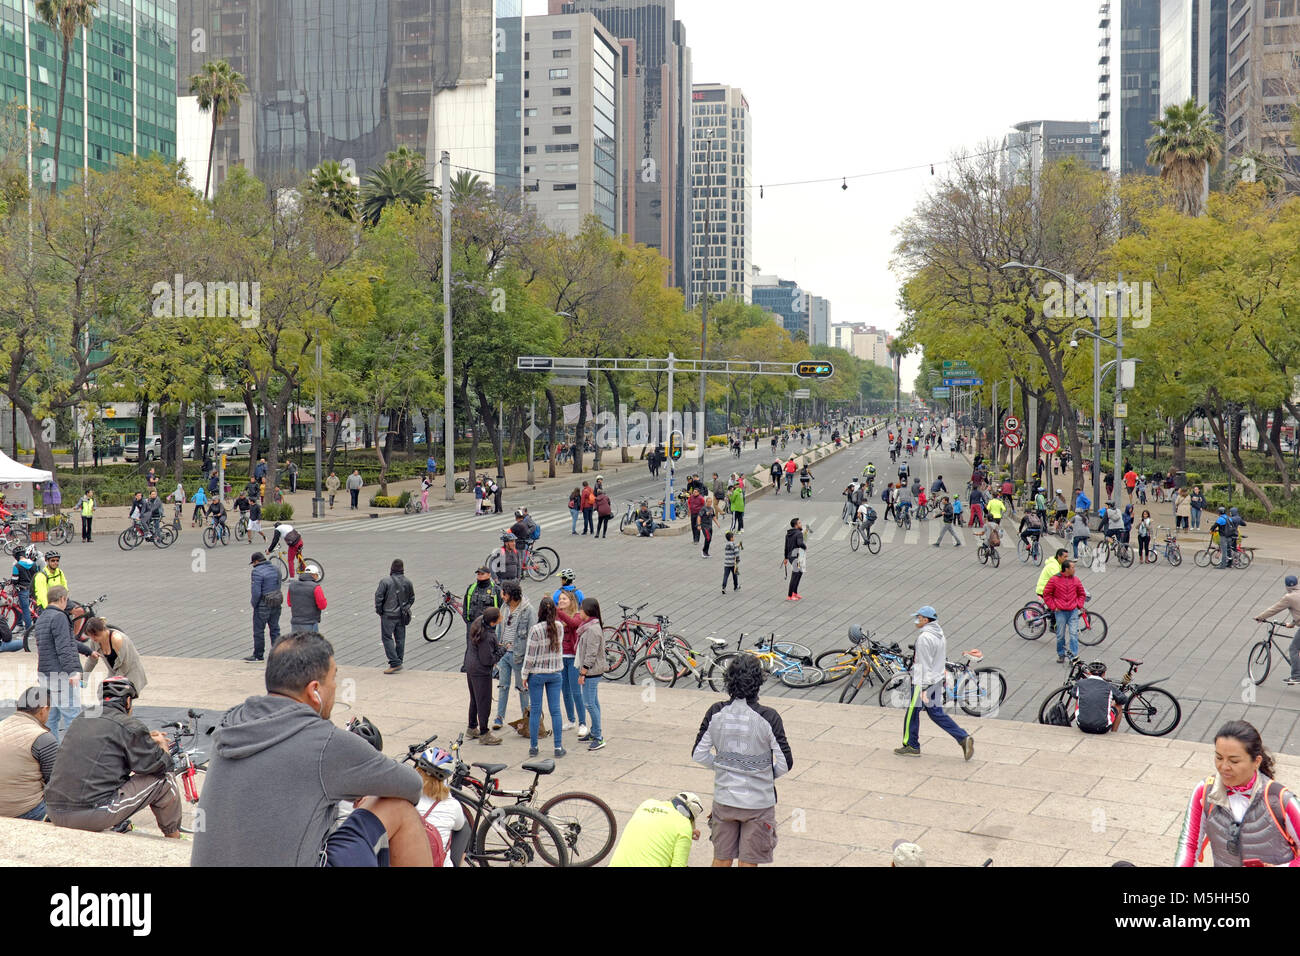 The Paseo de la Reforma along with many other roads in Mexico City become auto-free zones giving pedestrians and bikers freedom to recreate. Stock Photo